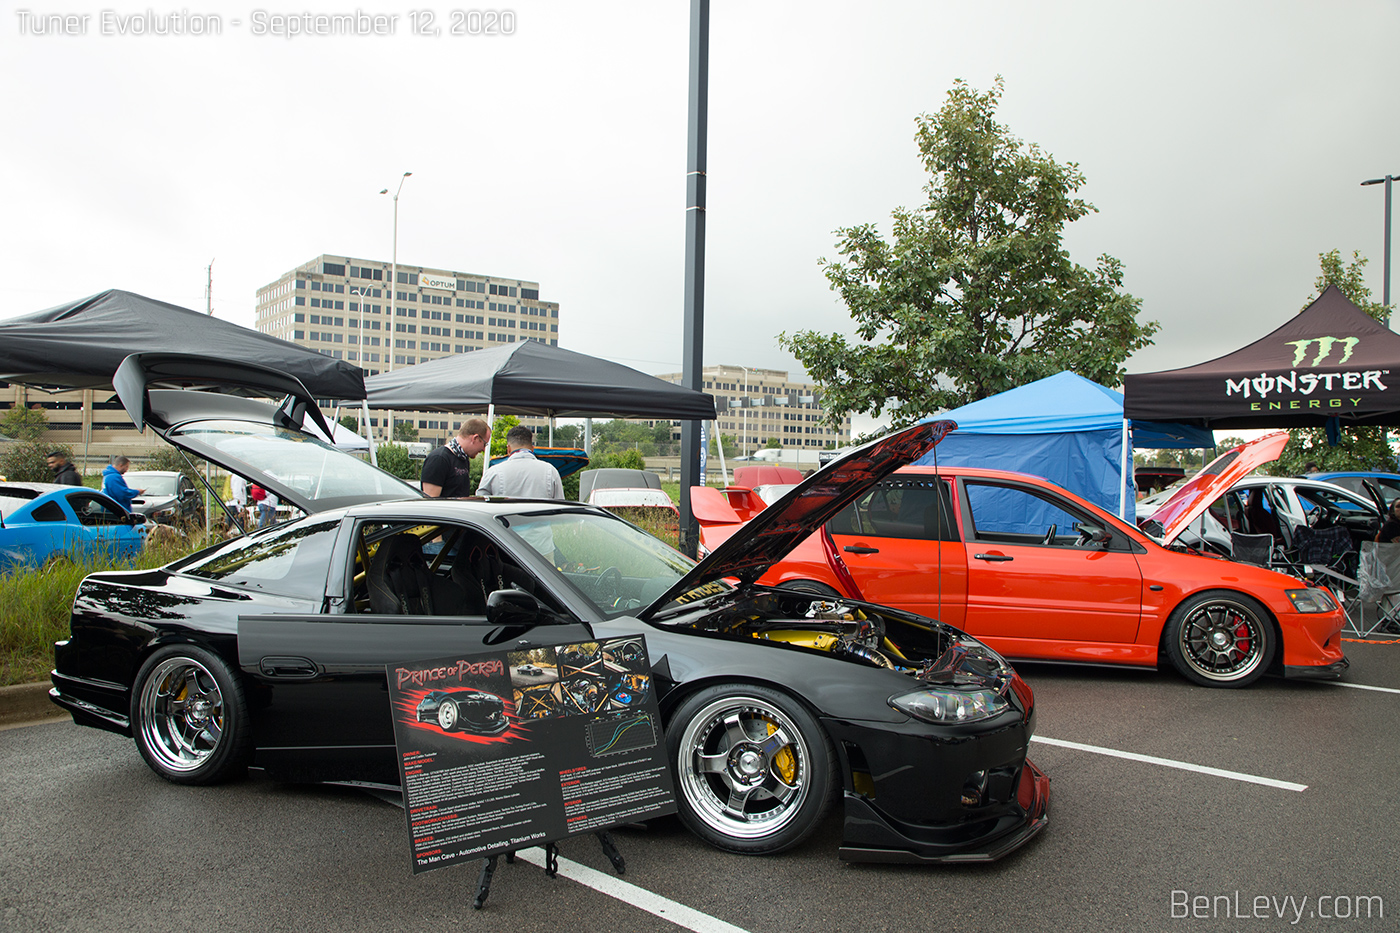 Prince of Persia Nissan 240SX